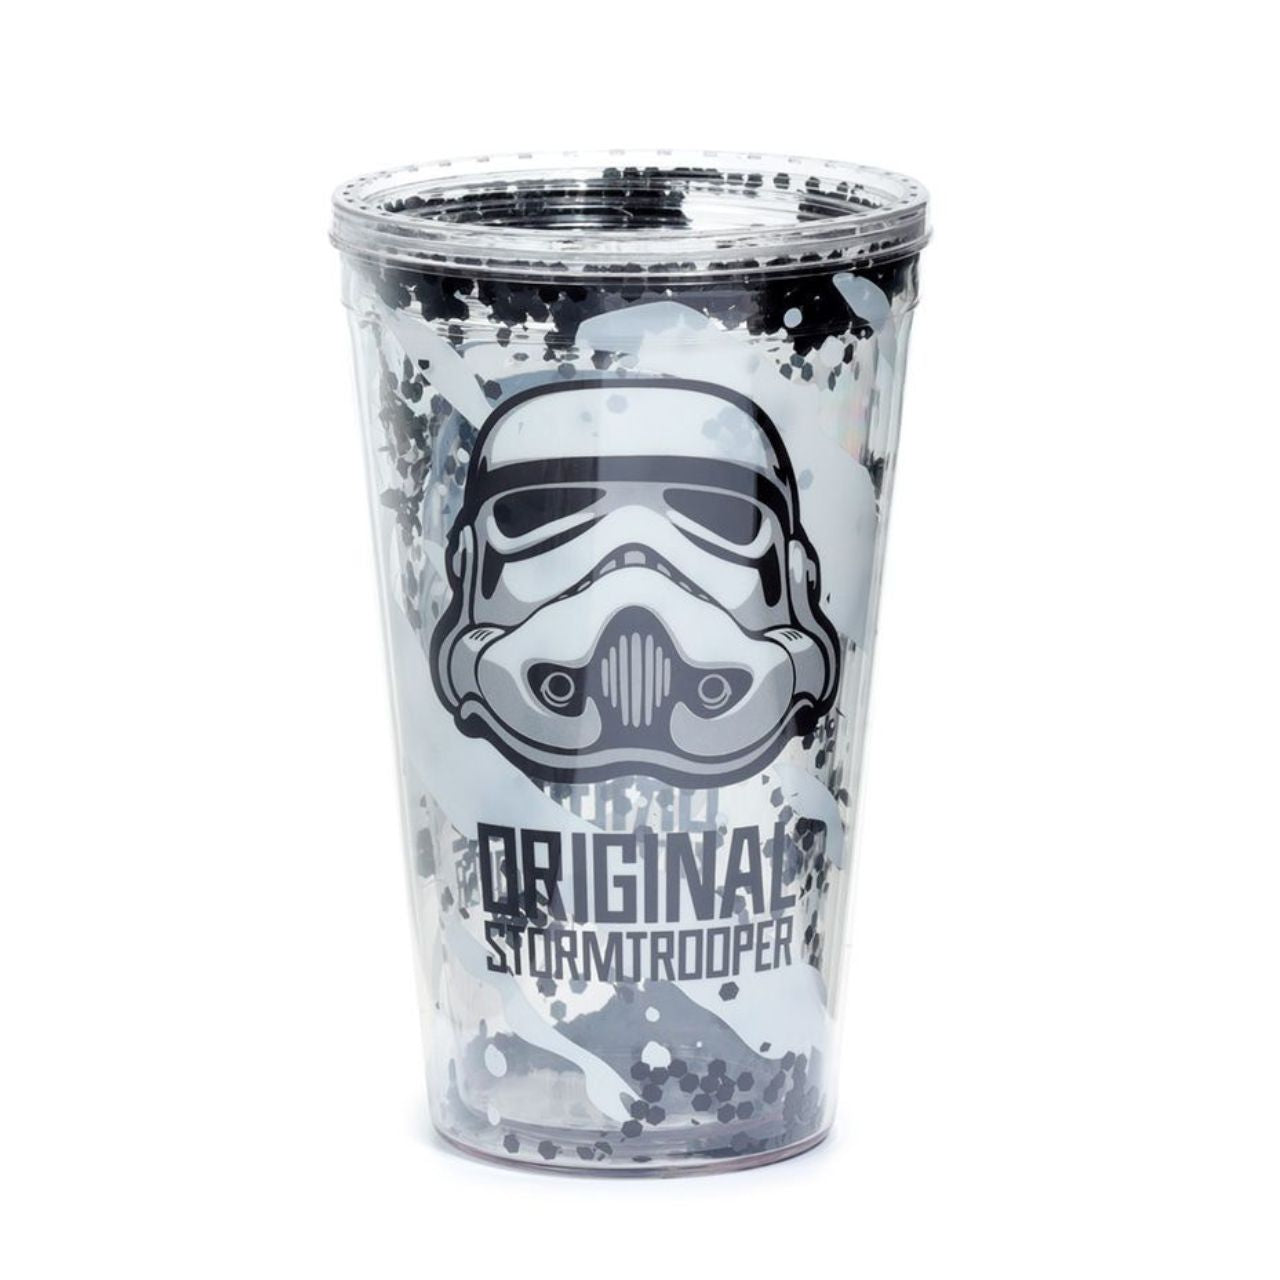 Shatterproof The Original Stormtrooper Double Walled Cup & Straw  Our double walled cups keep cold liquids cooler for longer. They are not suitable for hot liquids.